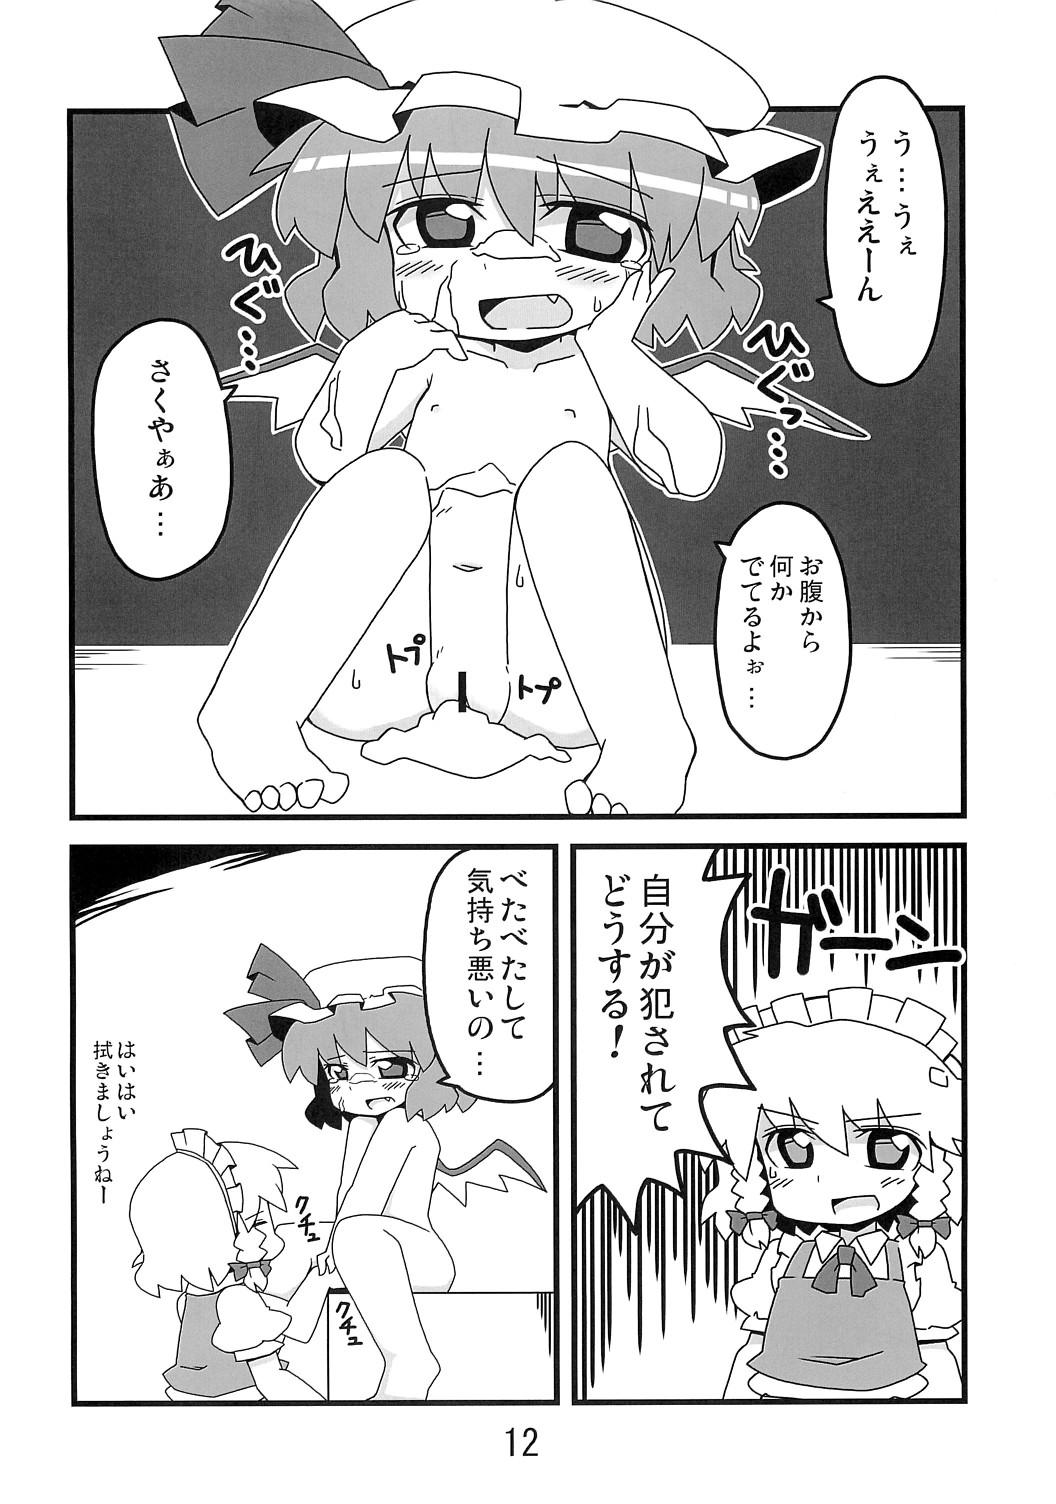 Game 東方豊年祭 - Touhou project Naija - Page 11